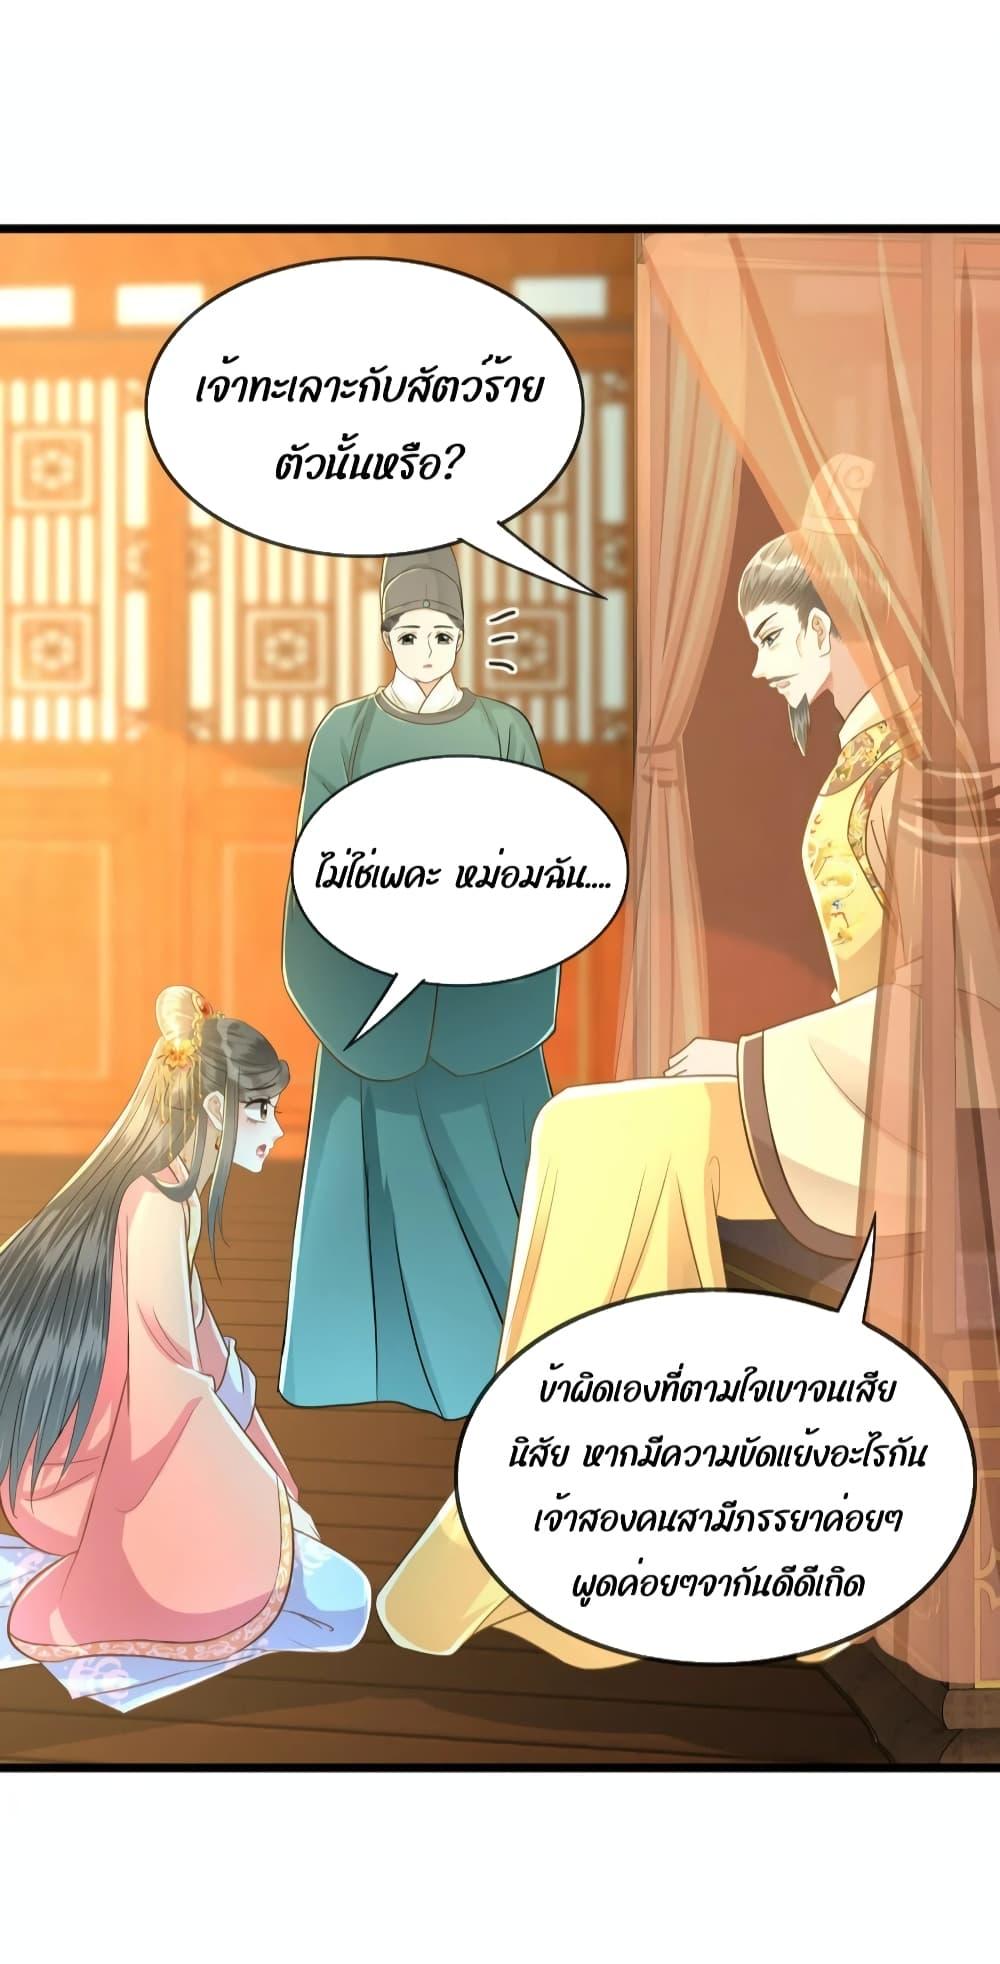 But what if His Royal Highness is the substitute โ€“ เธซเธฒเธเน€เธเธฒเน€เธเนเธเนเธเนเธ•เธฑเธงเนเธ—เธเธญเธเธเนเธฃเธฑเธเธ—เธฒเธขเธฒเธ—เธฅเนเธฐ เธ•เธญเธเธ—เธตเน 13 (4)